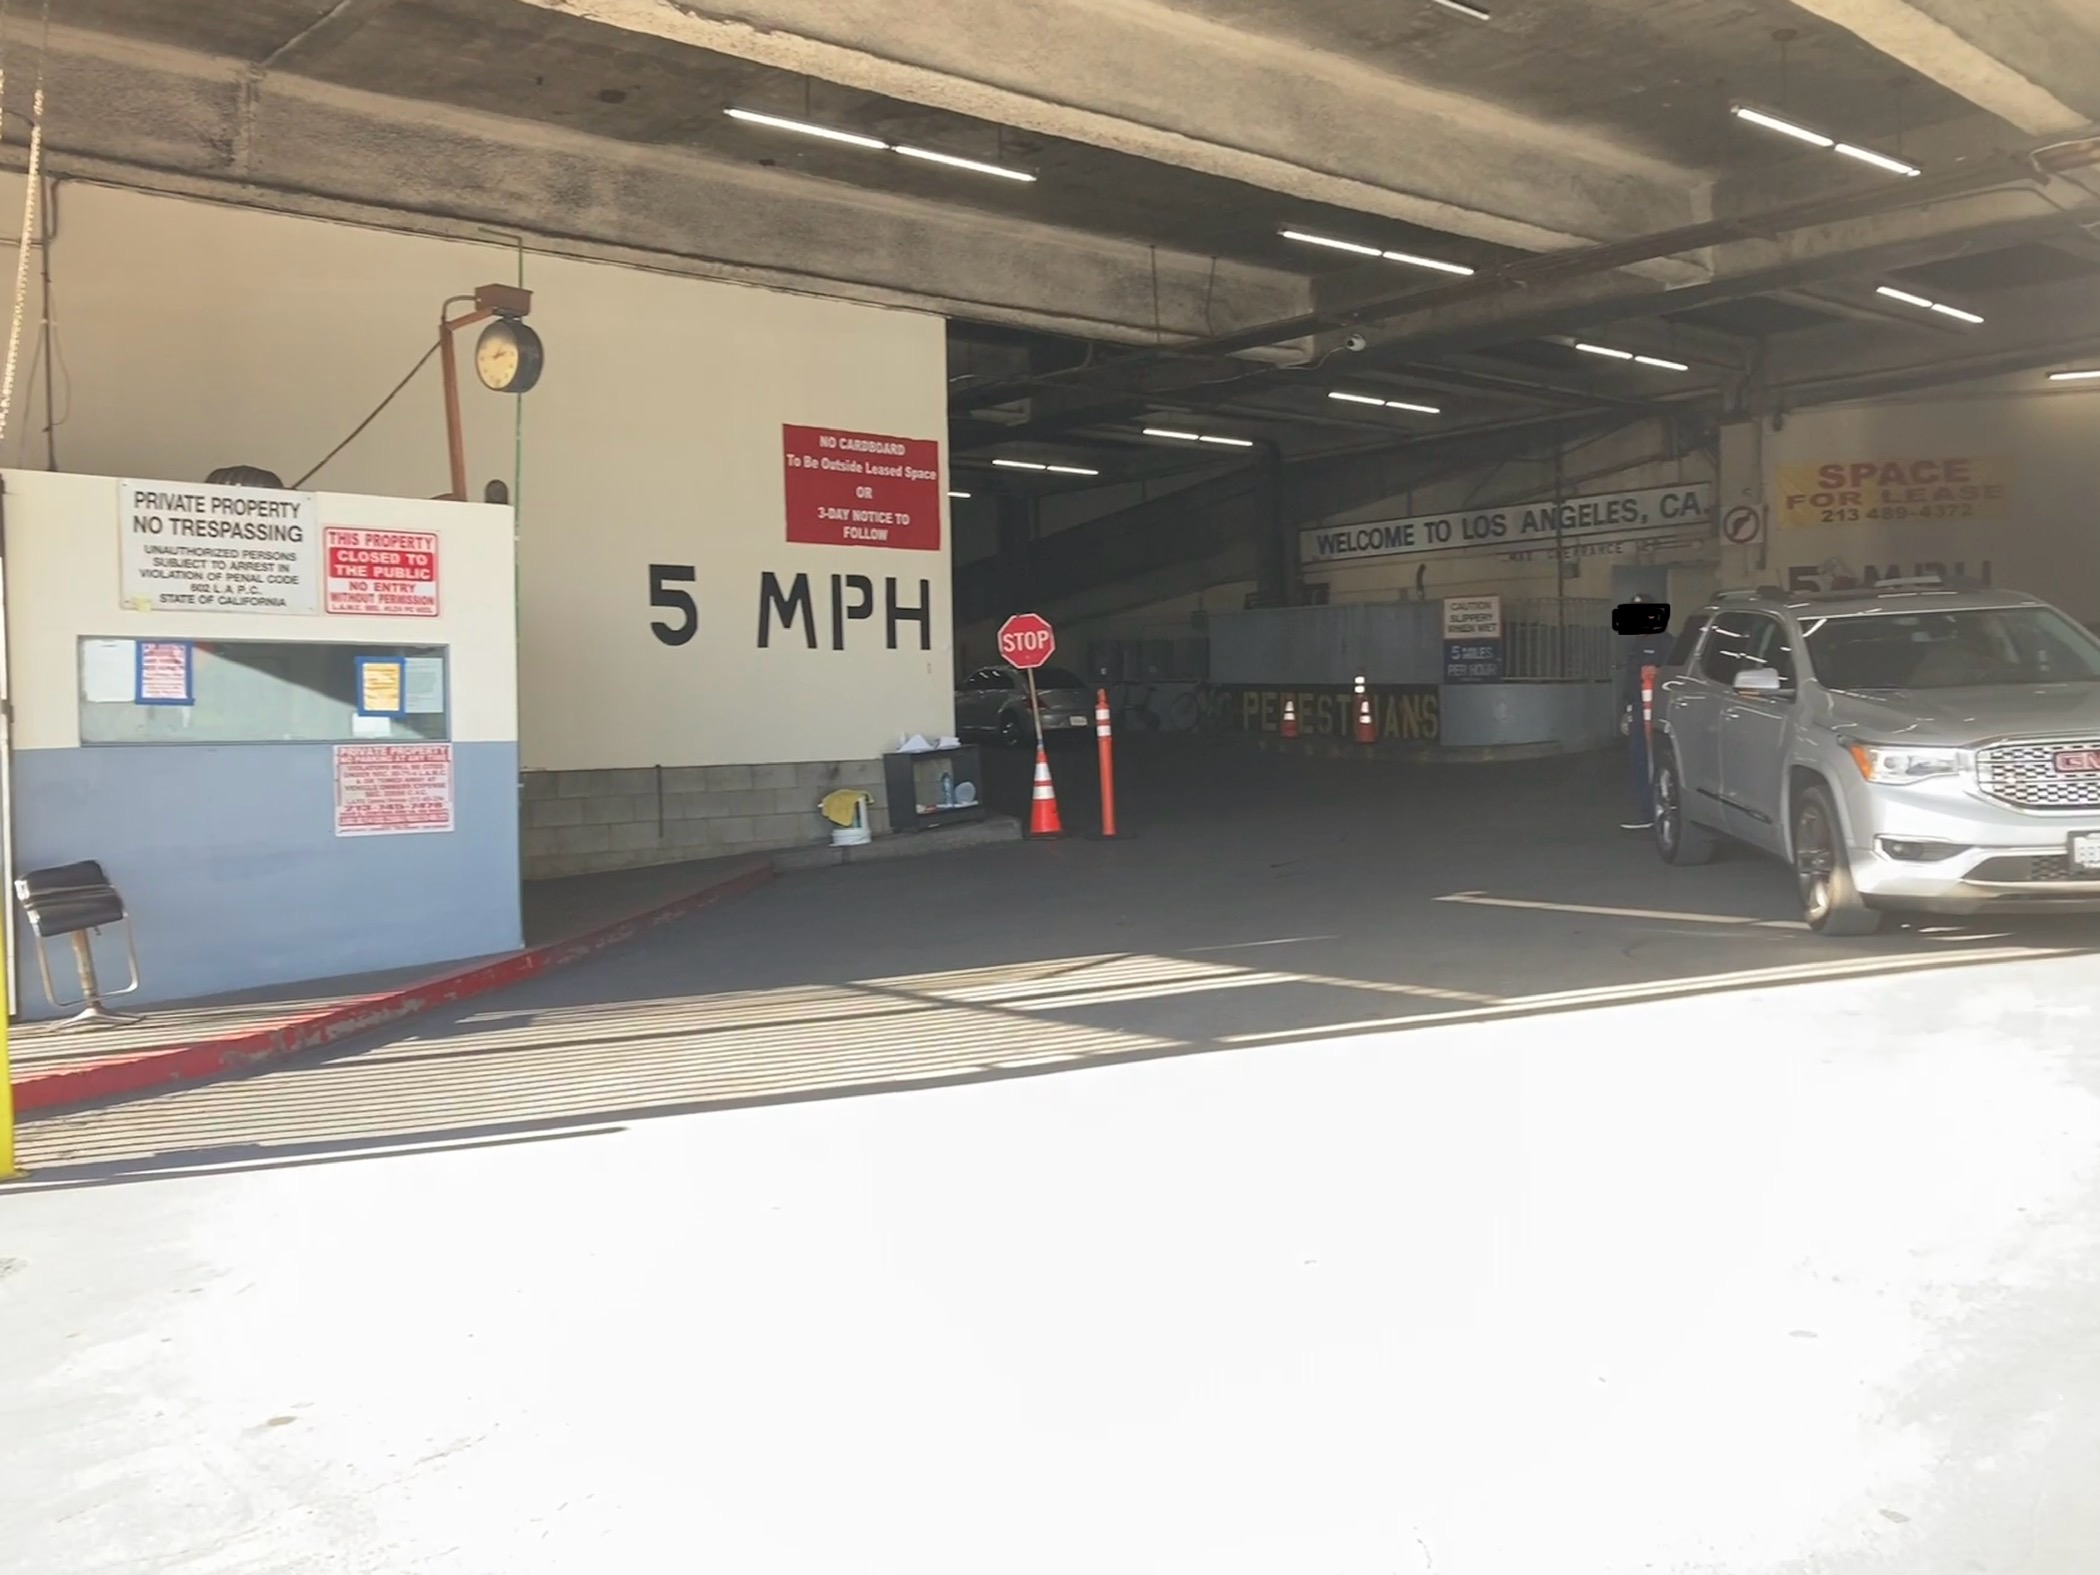 entrance to parking inside the Mart. The walls have 5 MPH speed limit stencilled on, and the ceiling slopes prominently downward to the left. several signs prohibit pedestrians, and one welcomes you to los angeles, CA